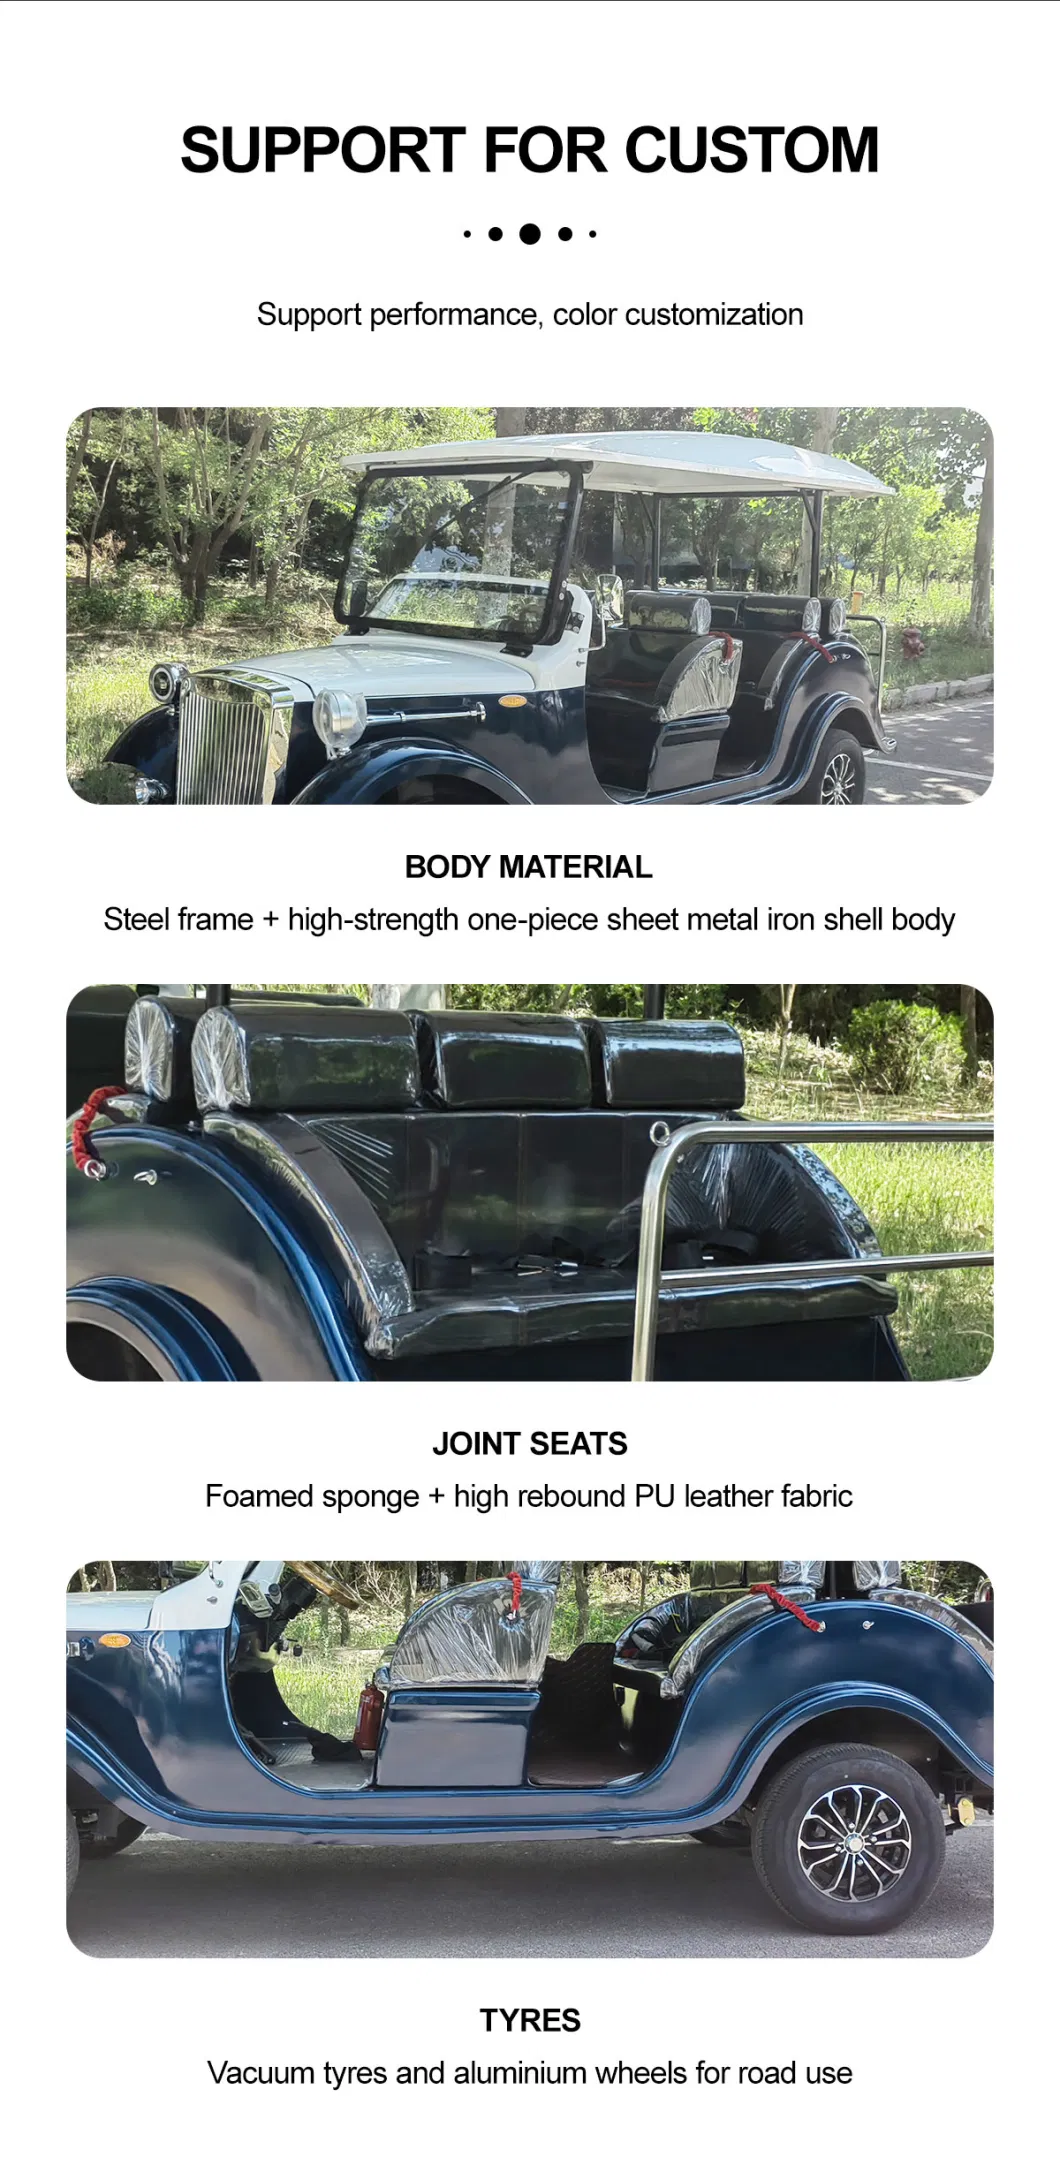 Best Free Color Custom 8 Seats Tourist EV Transport Sightseeing Vintage Bus Utility Vehicle Tour Electric Motorized Power Classic Retro Car Price for Sale